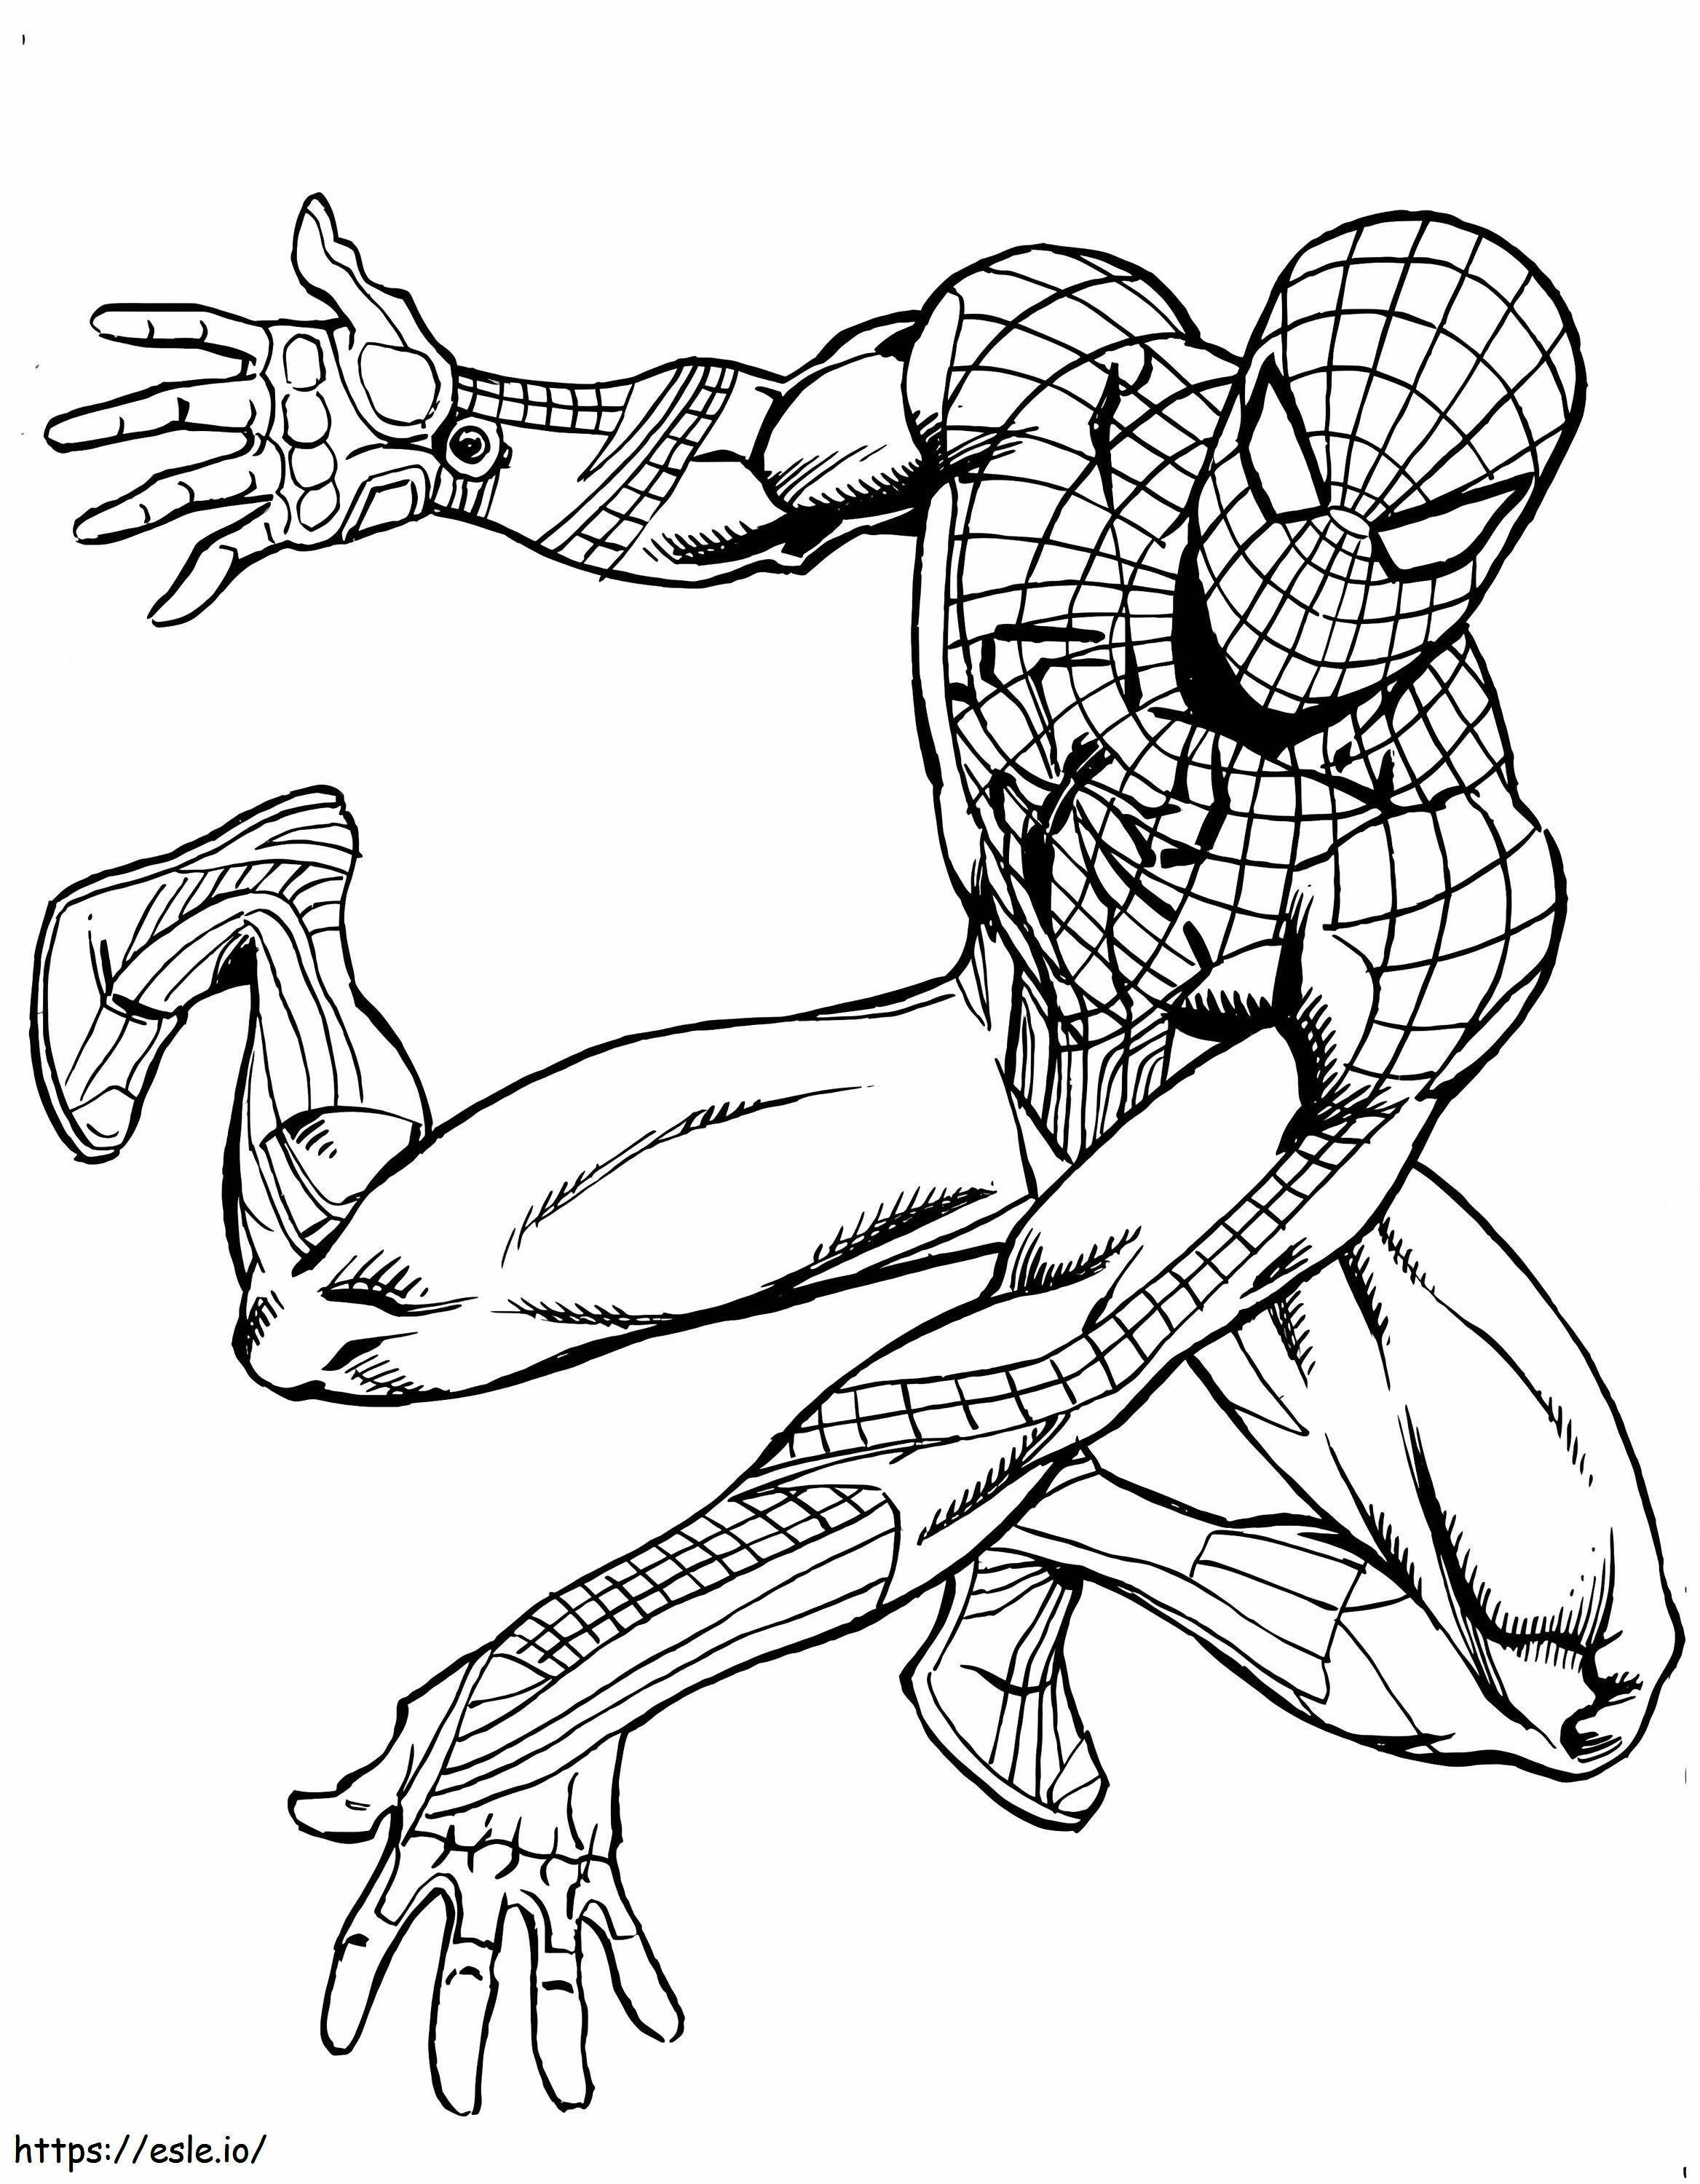 Spiderman 1 coloring page